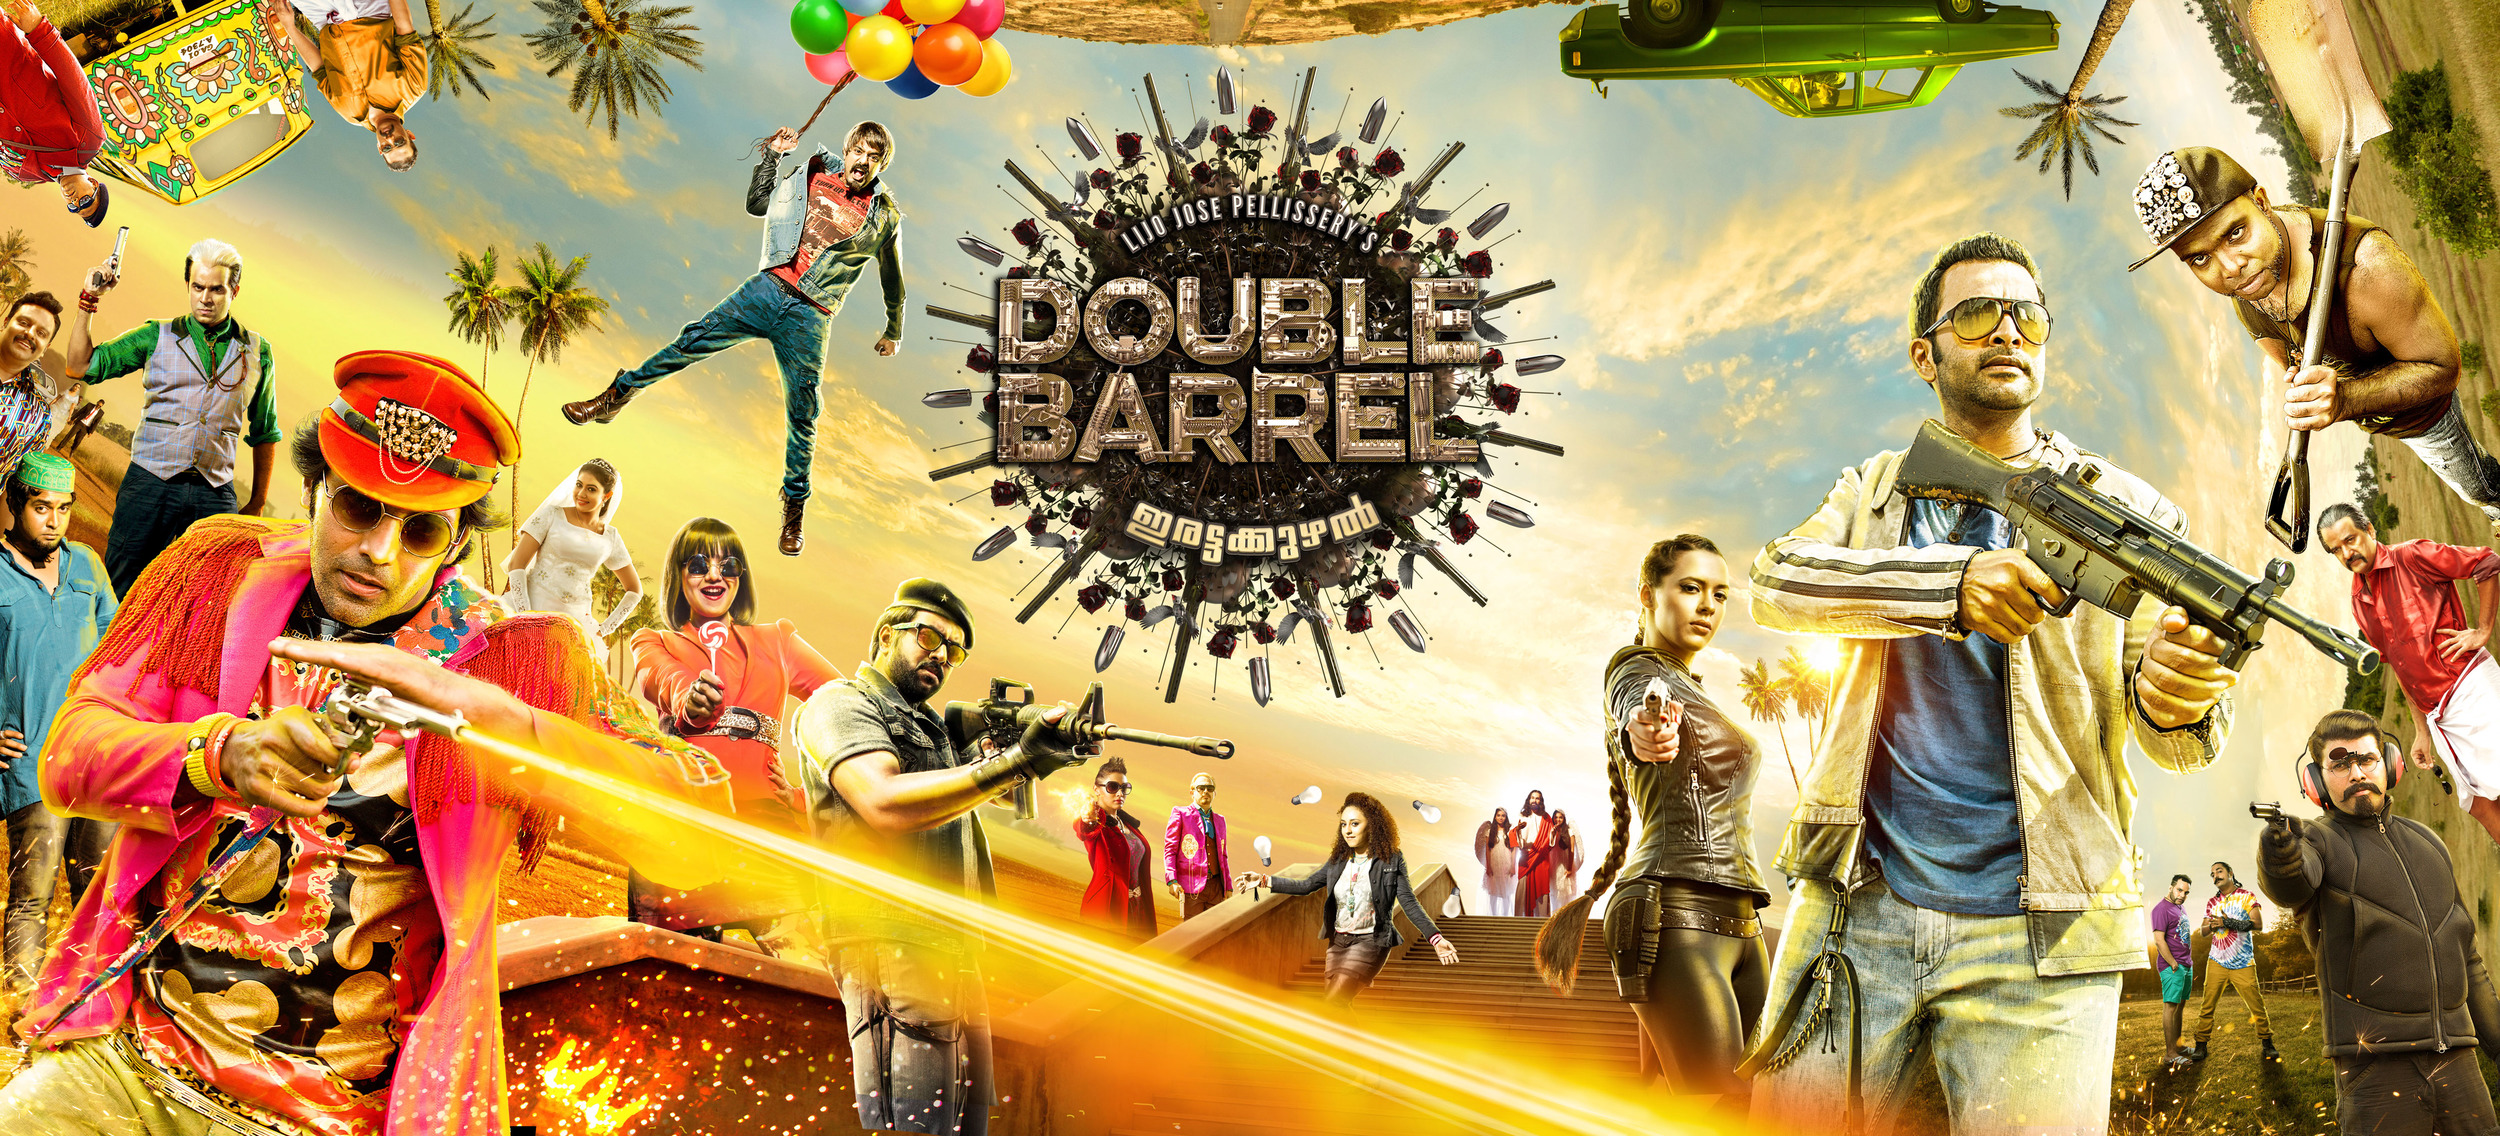 Mega Sized Movie Poster Image for Double Barrel (#9 of 10)